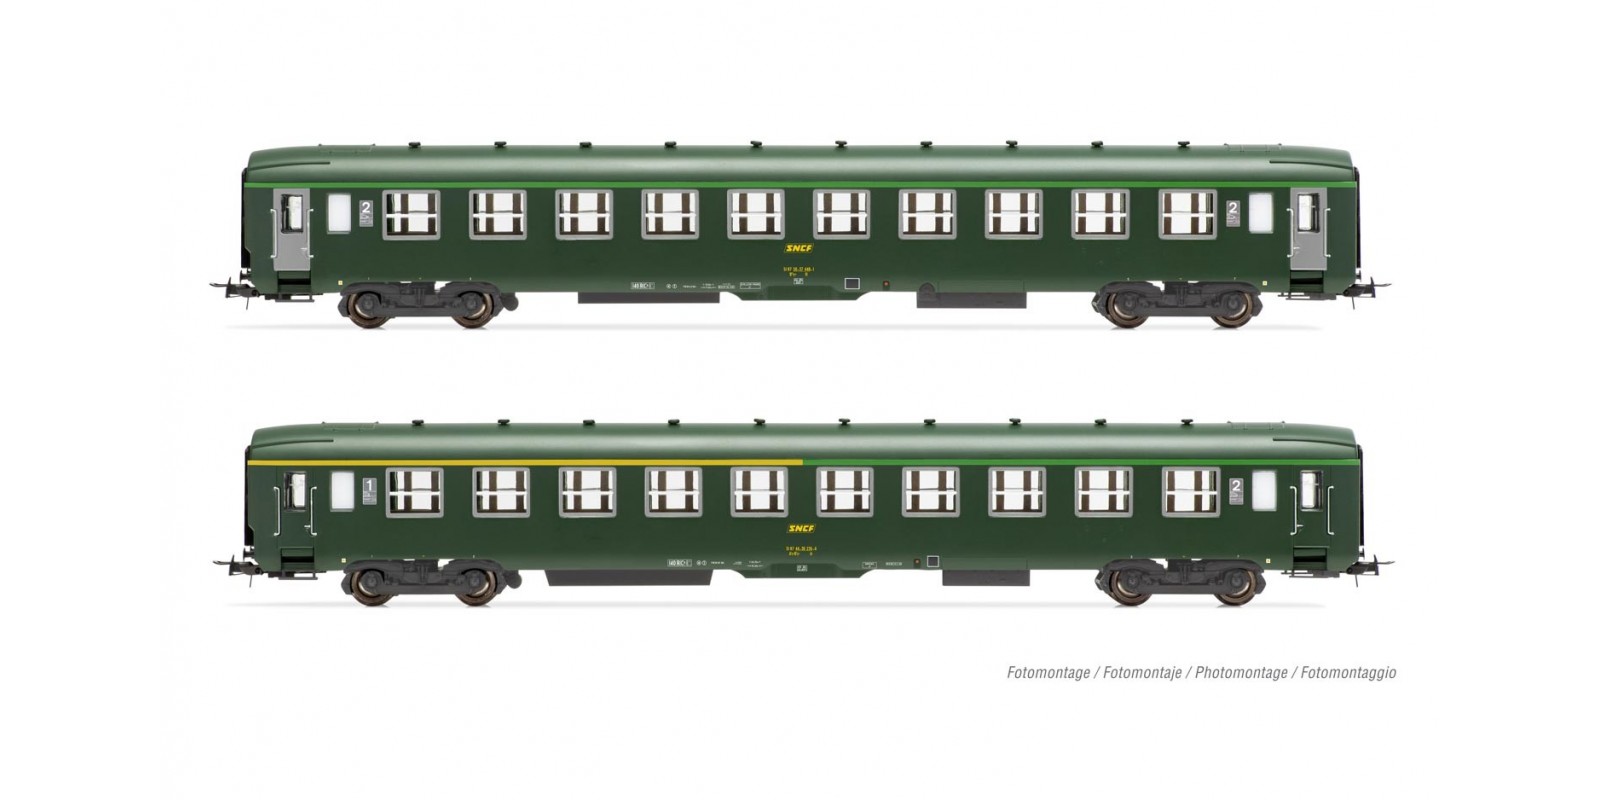 JO4147 SNCF, 2-unit pack DEV AO, A4c4B5c5 + B10c10 (with grey doors), green livery, period IV